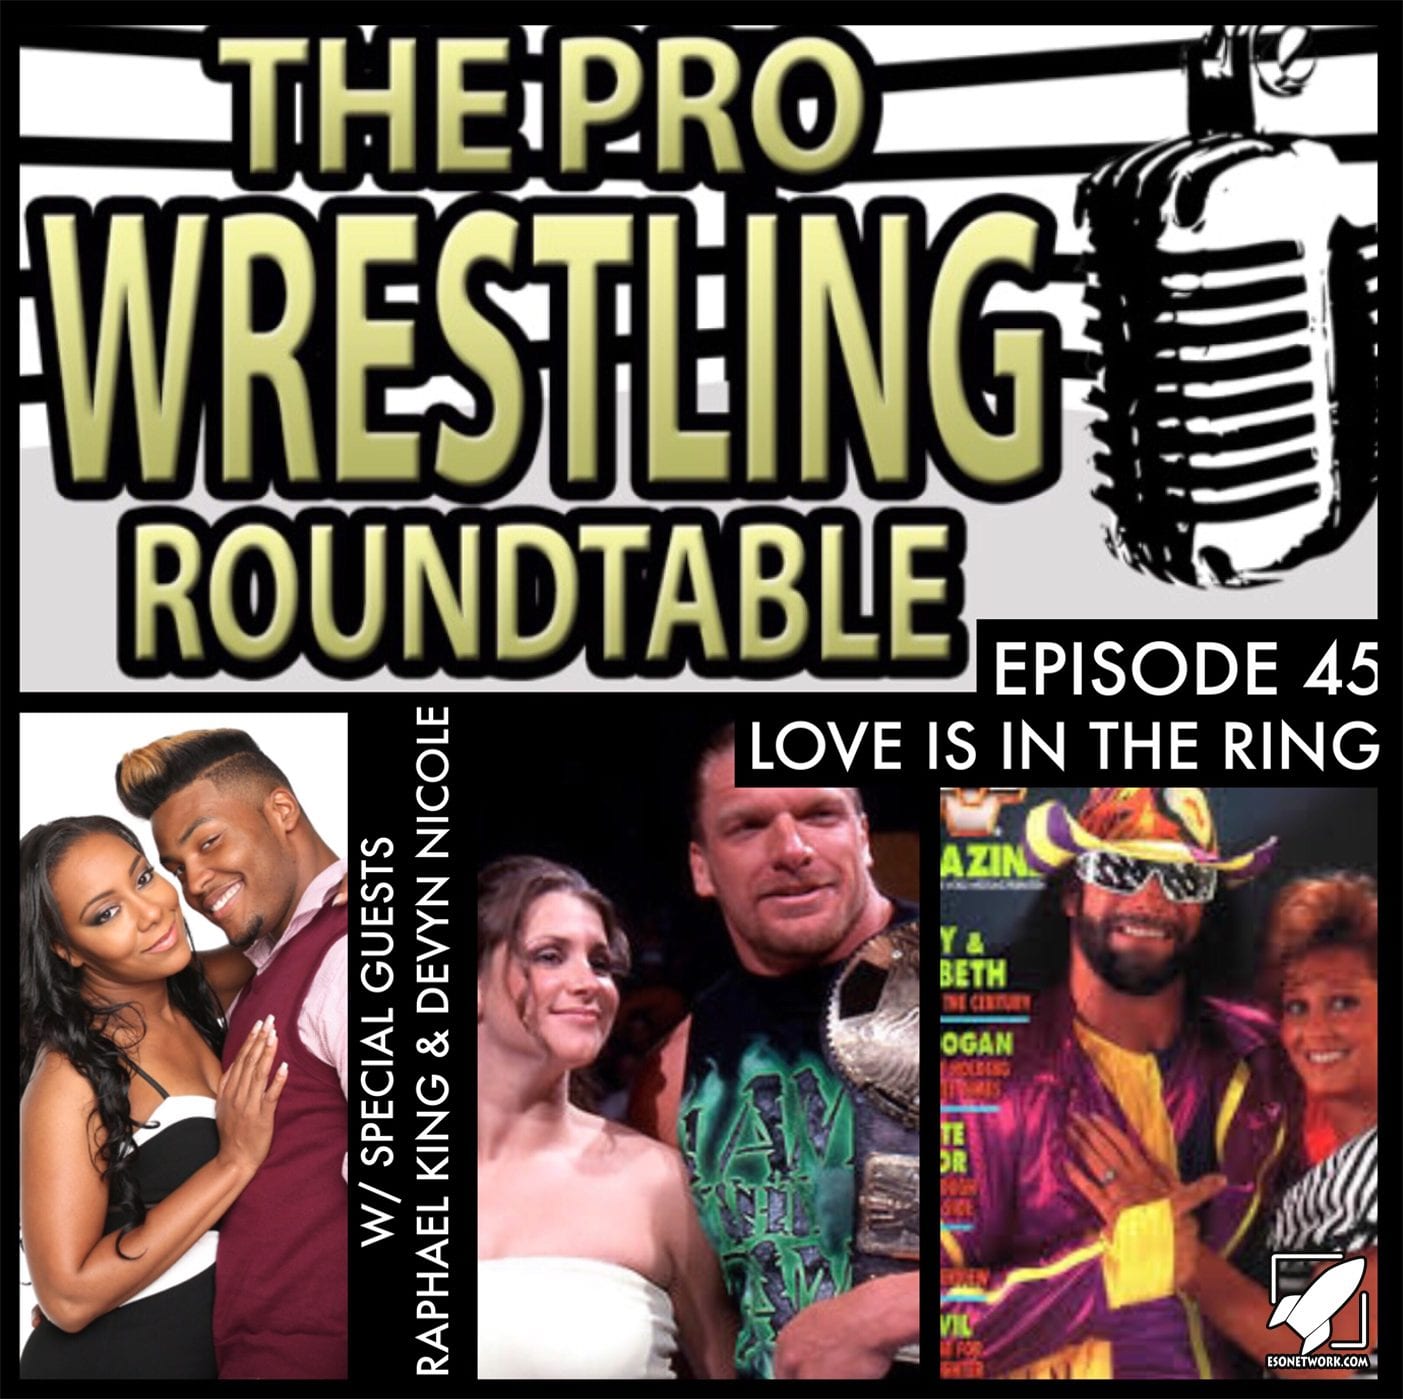 The Pro Wrestling Roundtable Ep 45